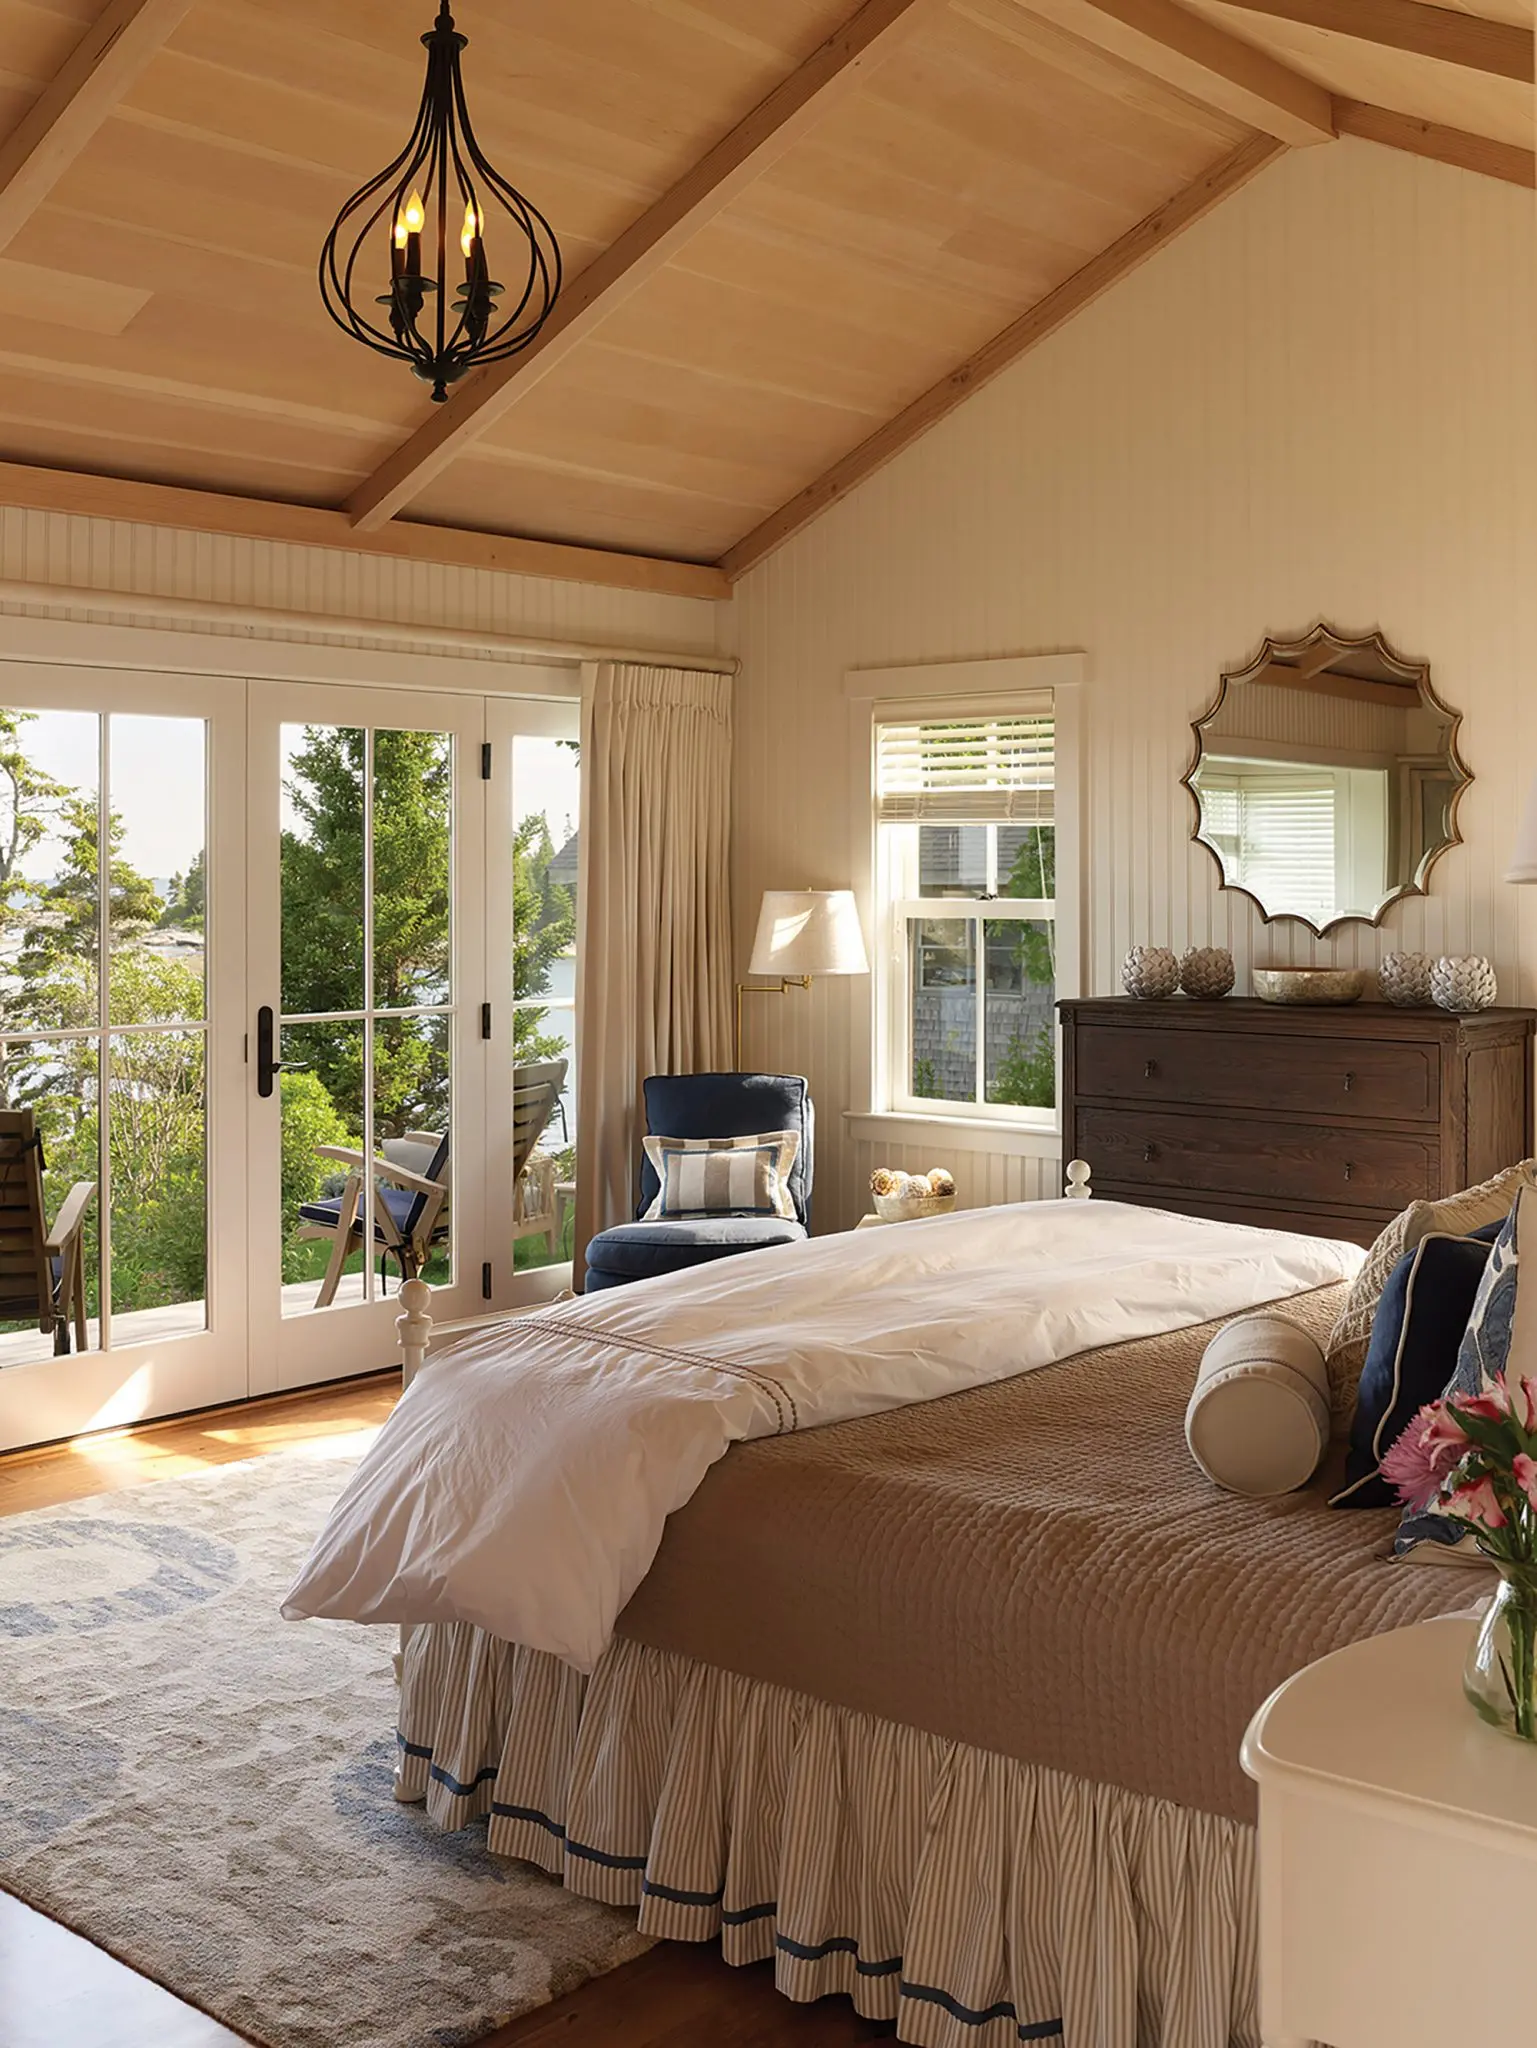 Paneled bedroom with french doors to porch